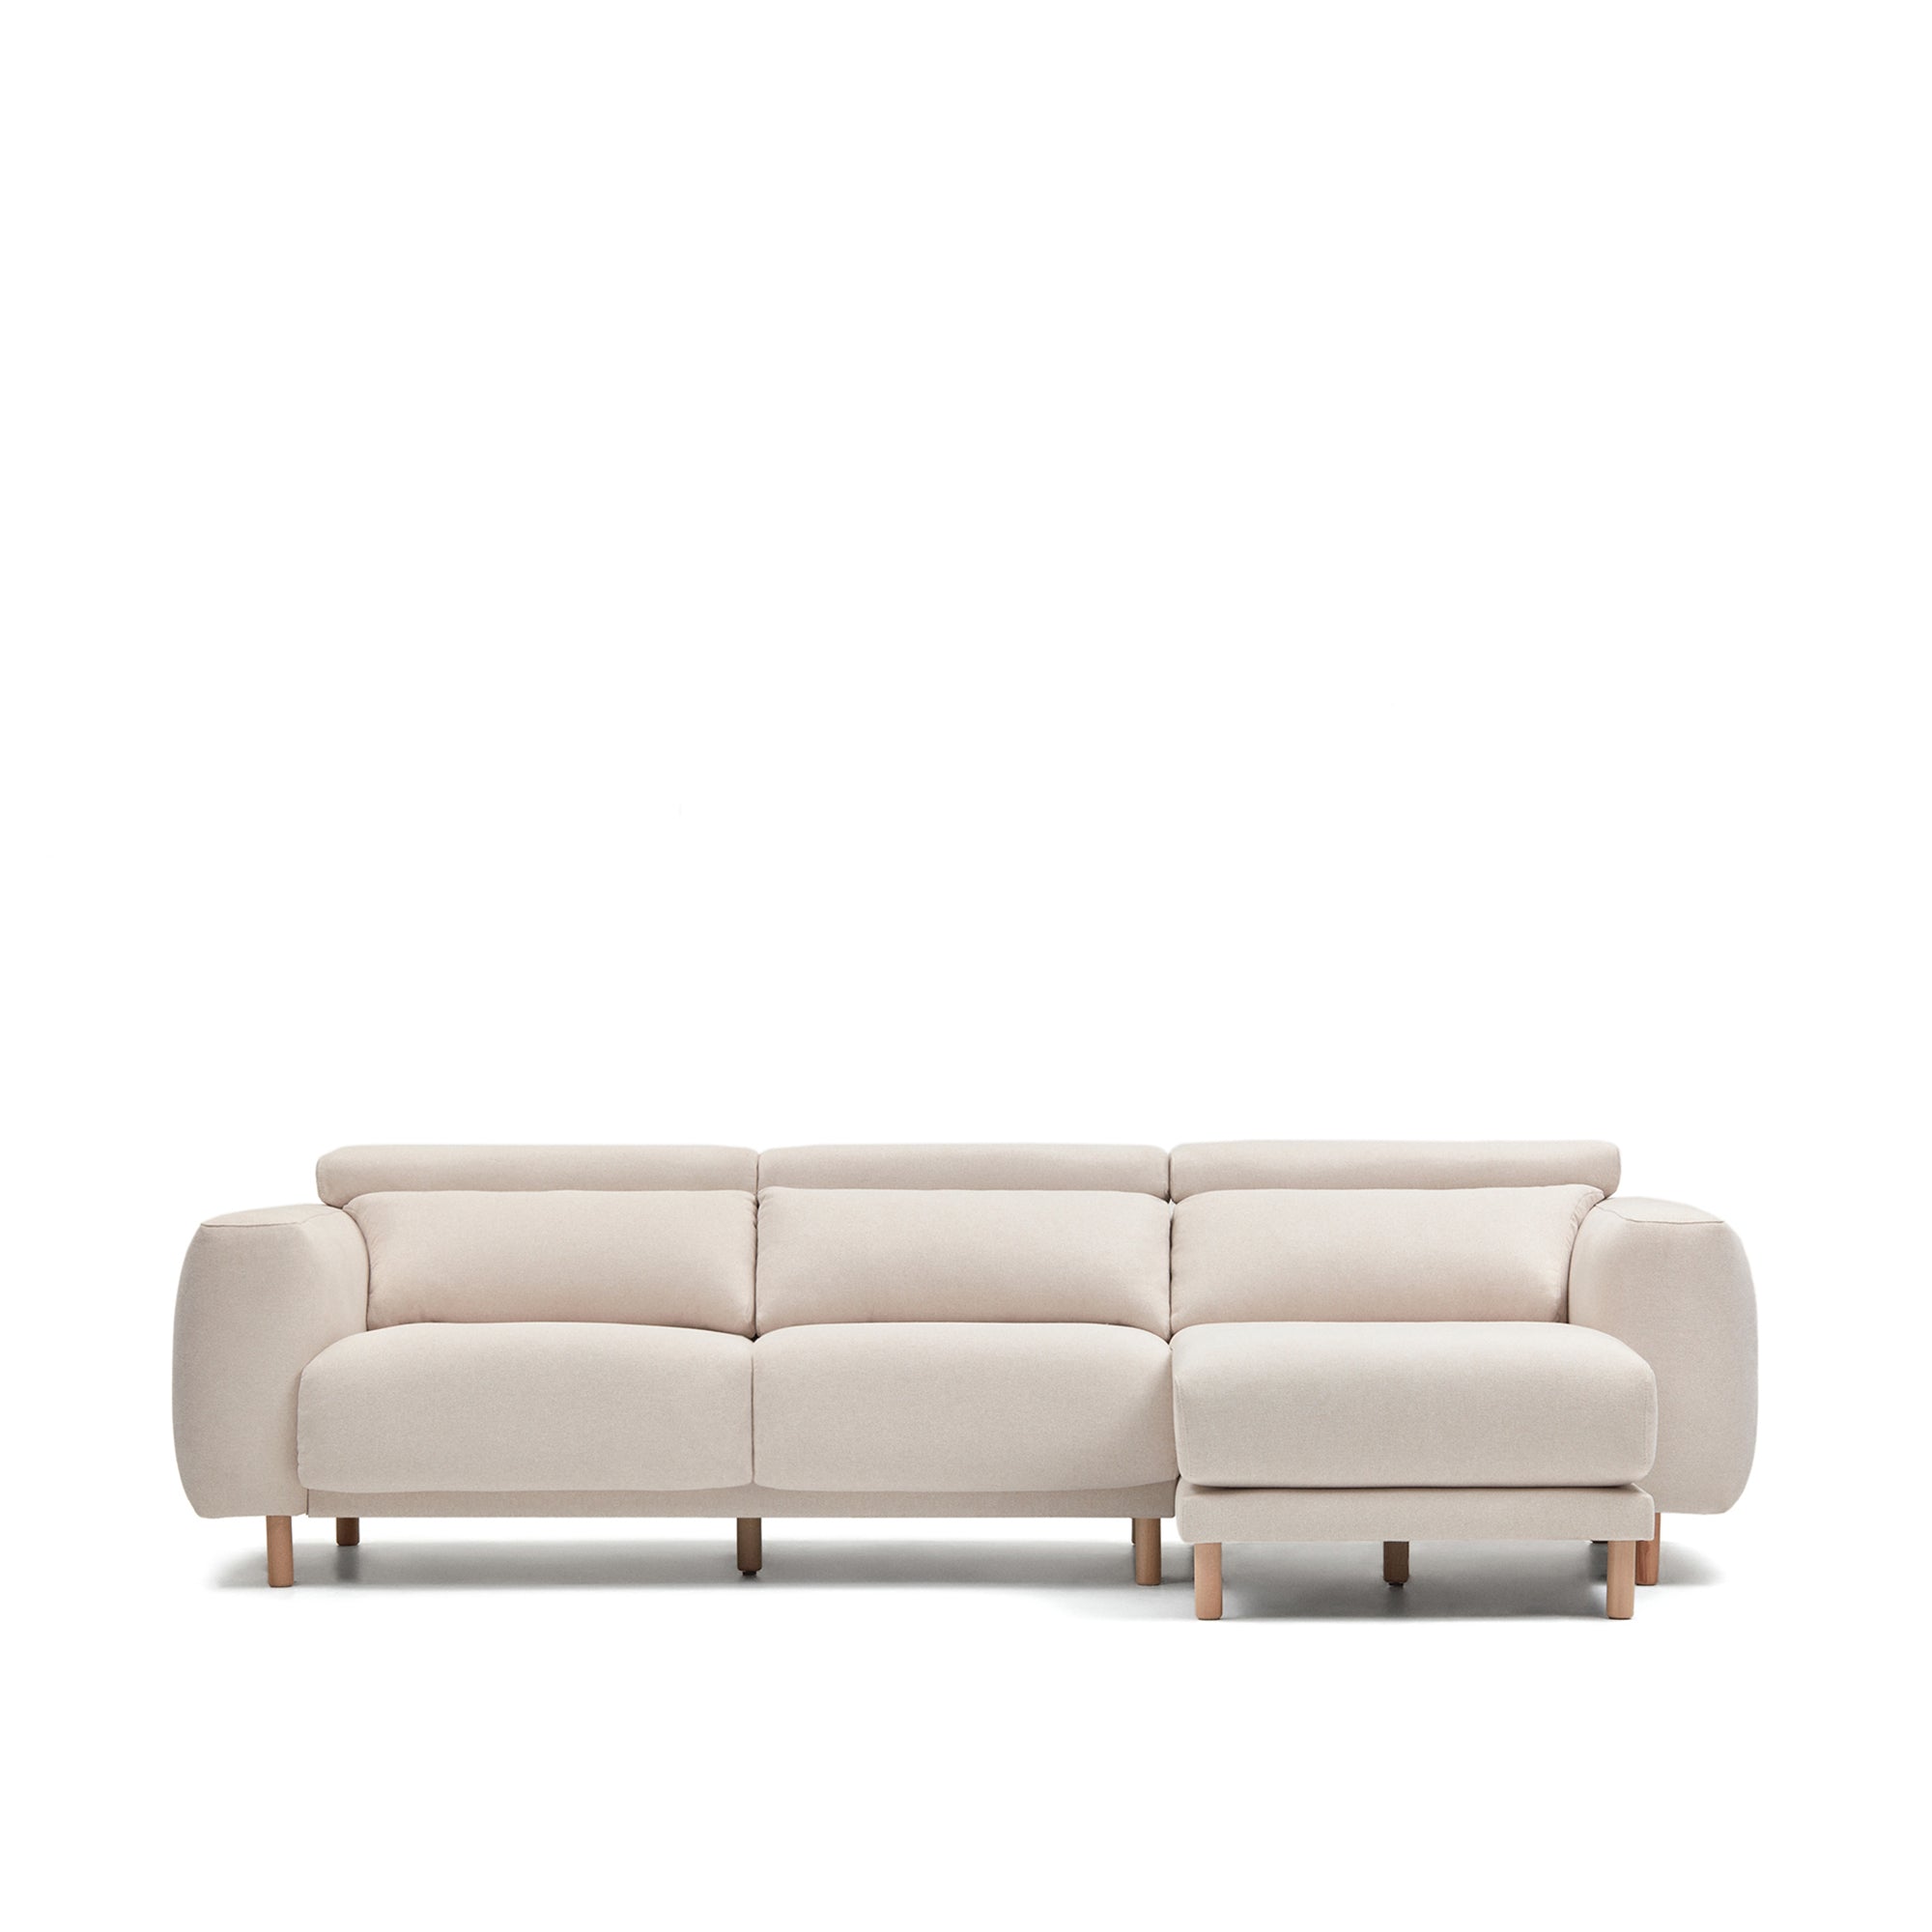 Singa 3 seater sofa with right-hand chaise longue in white, 296 cm